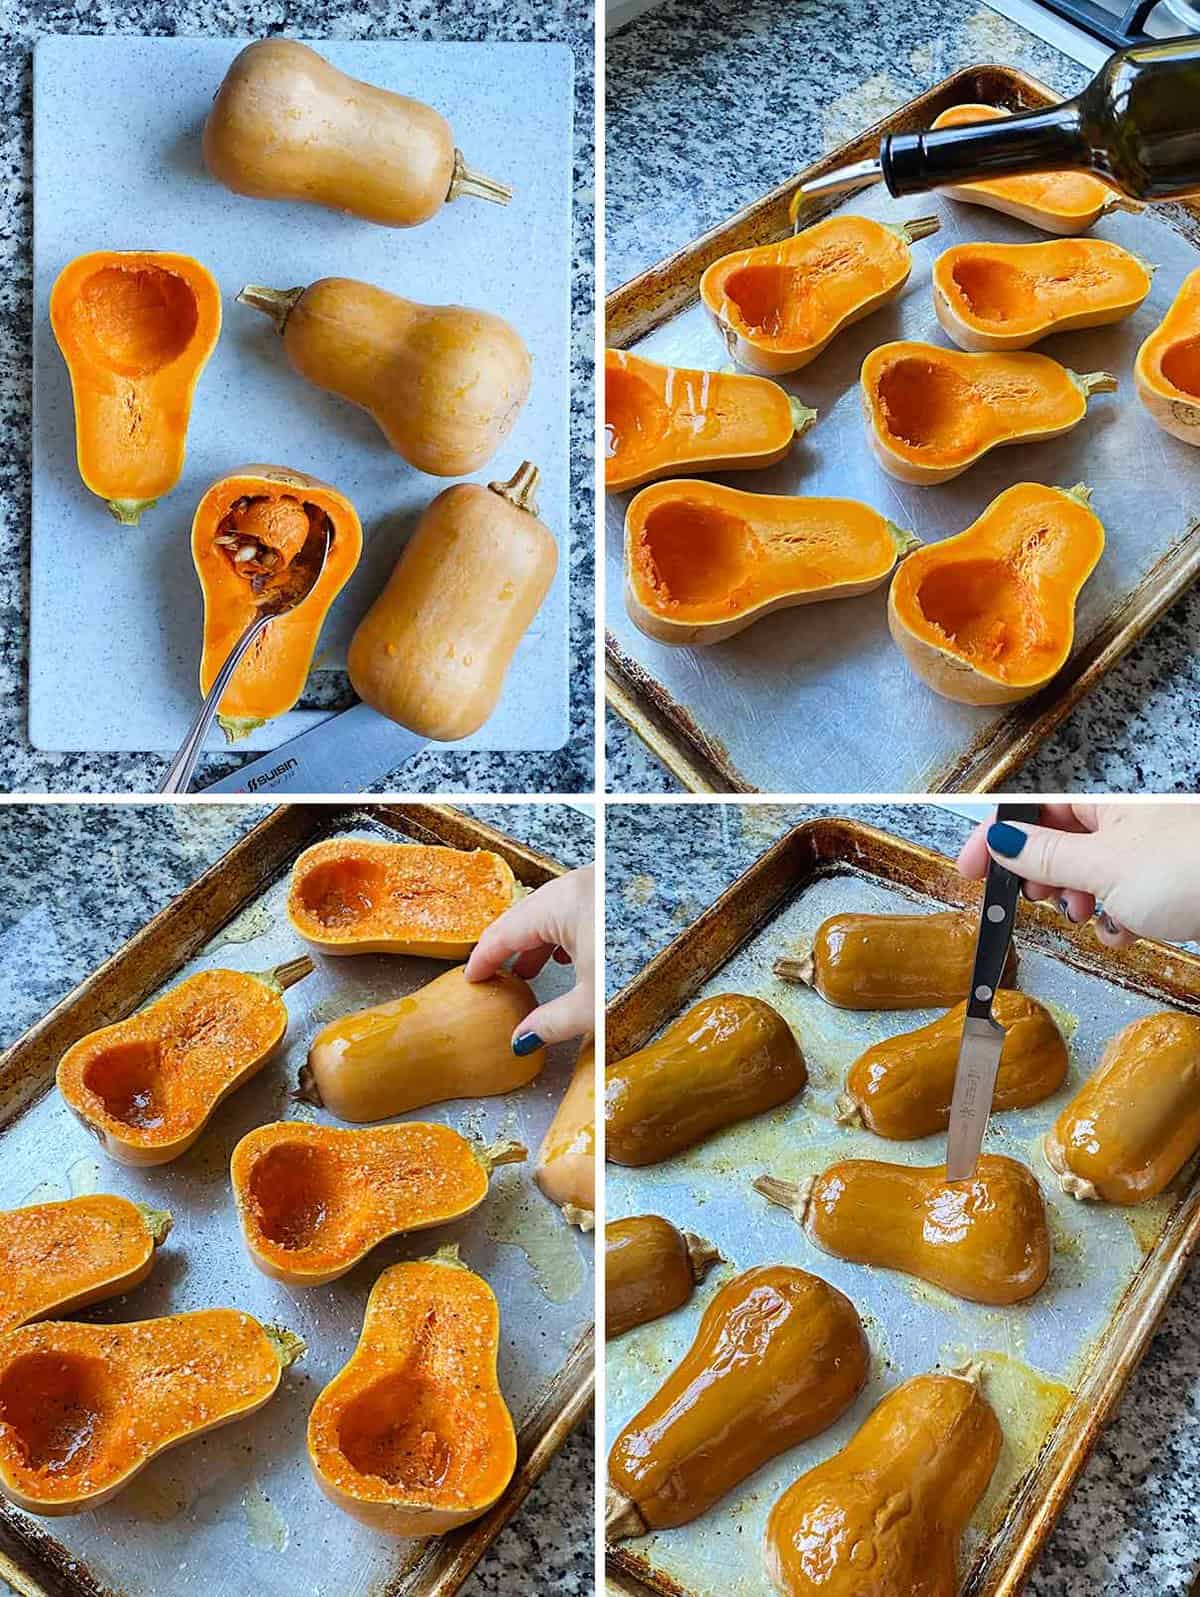 Process collage showing how to cut and seed a honeynut squash, season, and roast skin-side-up until tender.